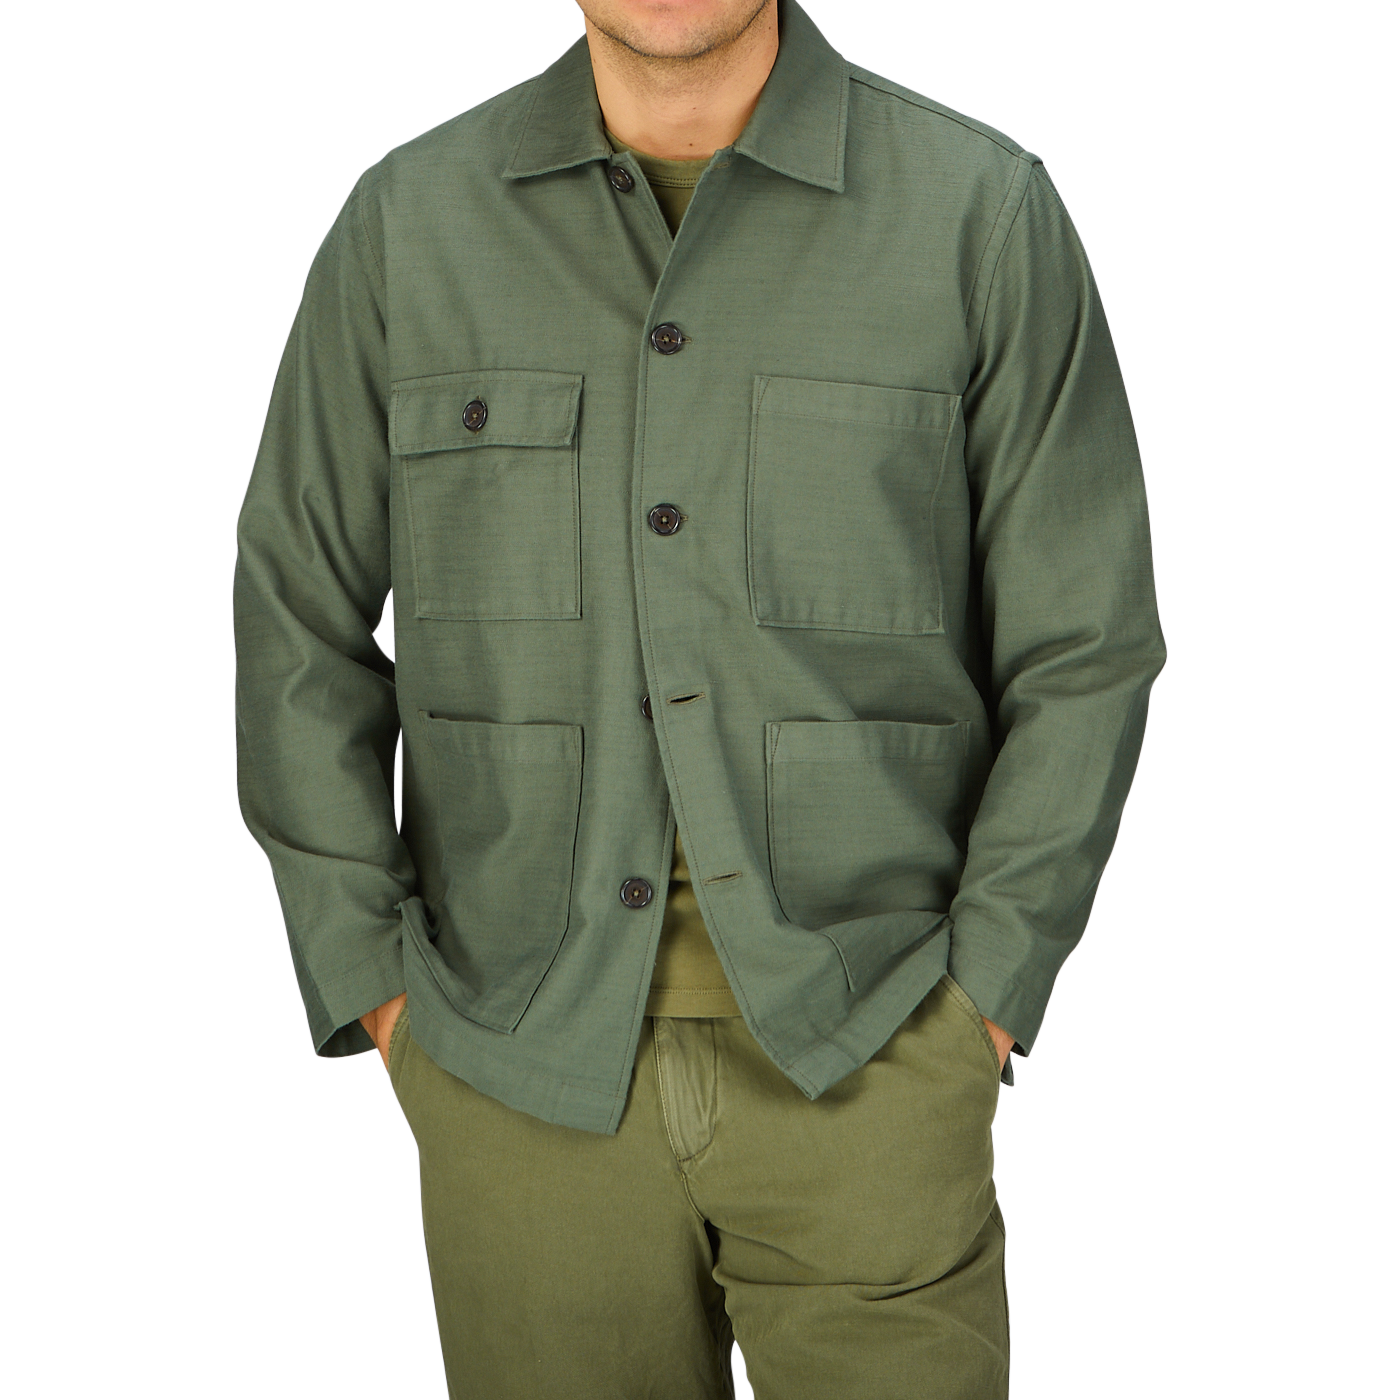 Man wearing a green Universal Works Olive Green Cotton Sateen Dockside Jacket with pockets standing against a gray background.